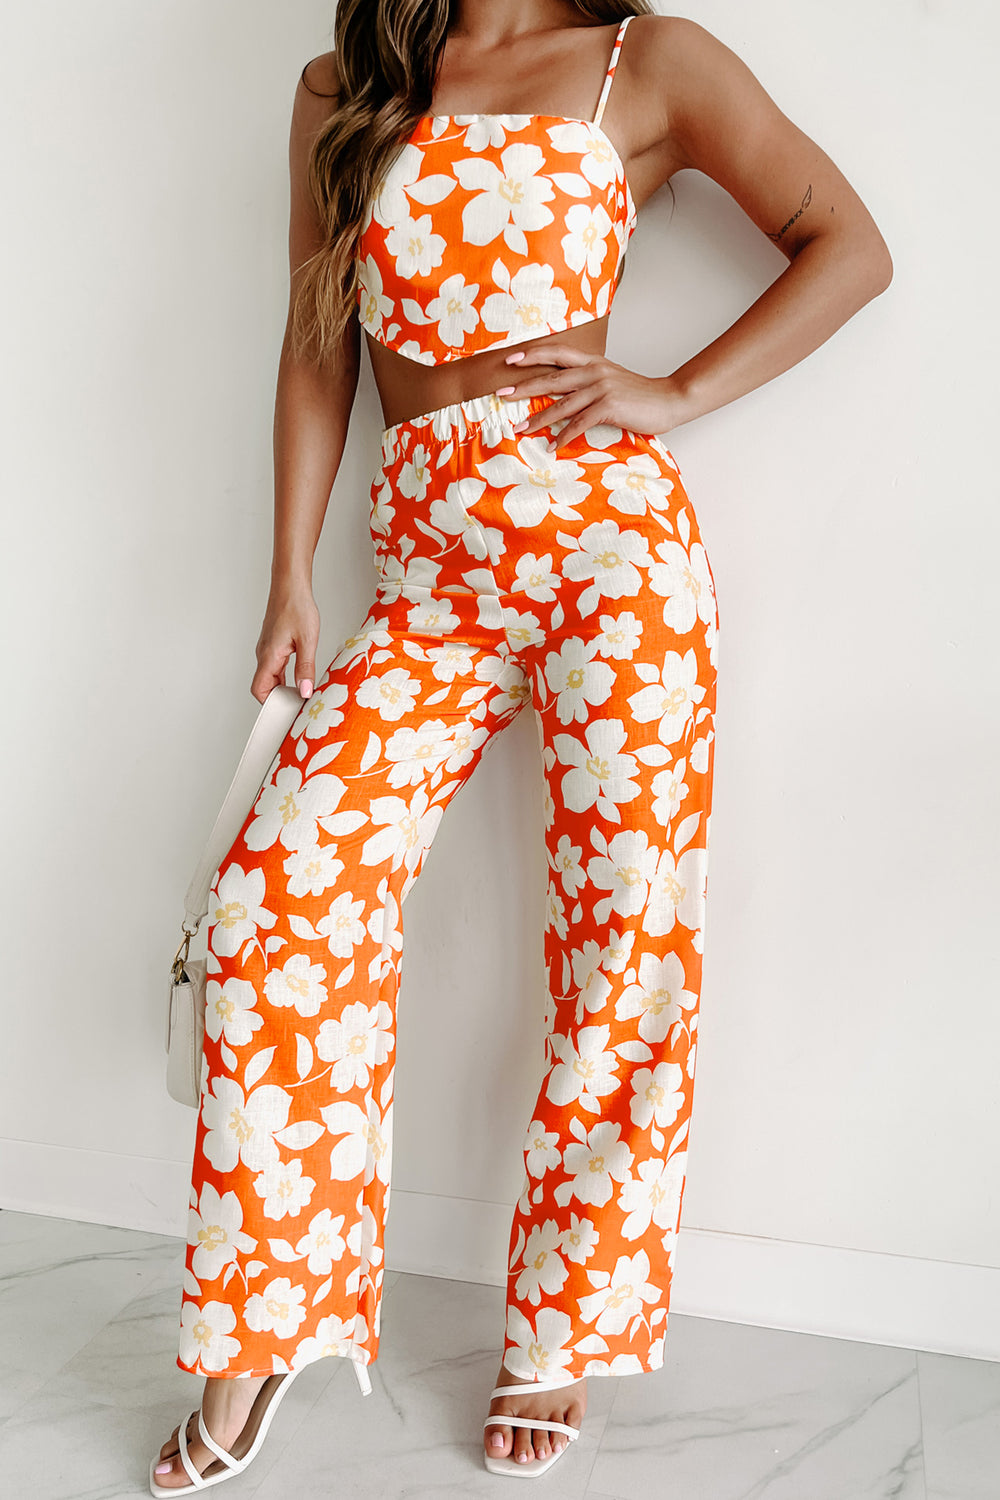 About To Blossom Floral Crop Top & Pant Set (Coral Combo) - NanaMacs